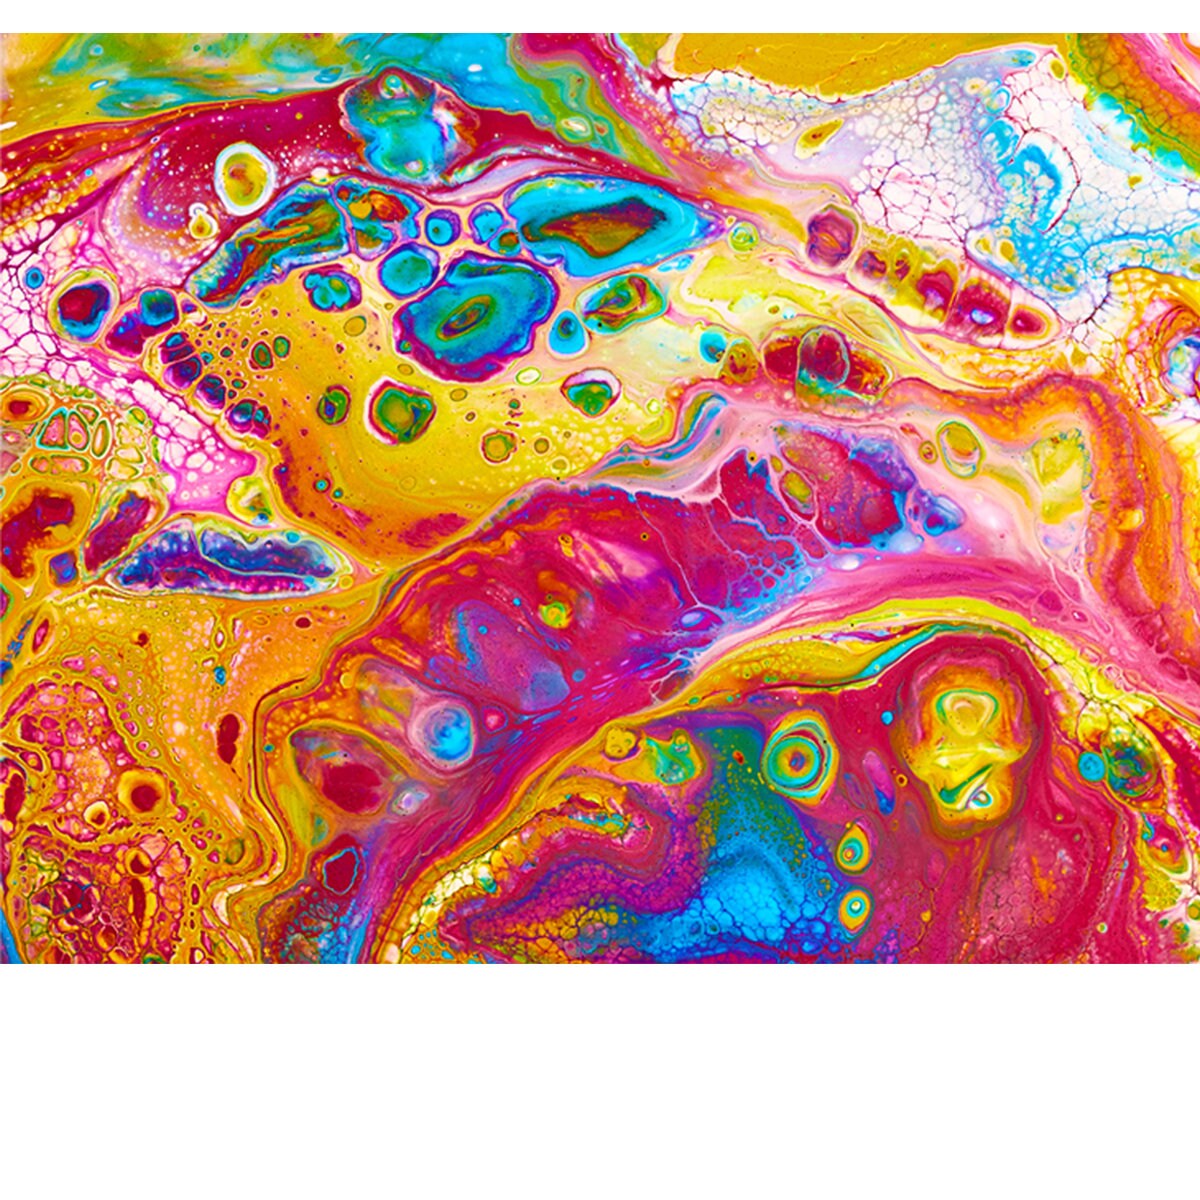 Fluid Art. Abstract Colorful Background, Wallpaper. Mixing Paints Wallpaper Girl Bedroom Mural